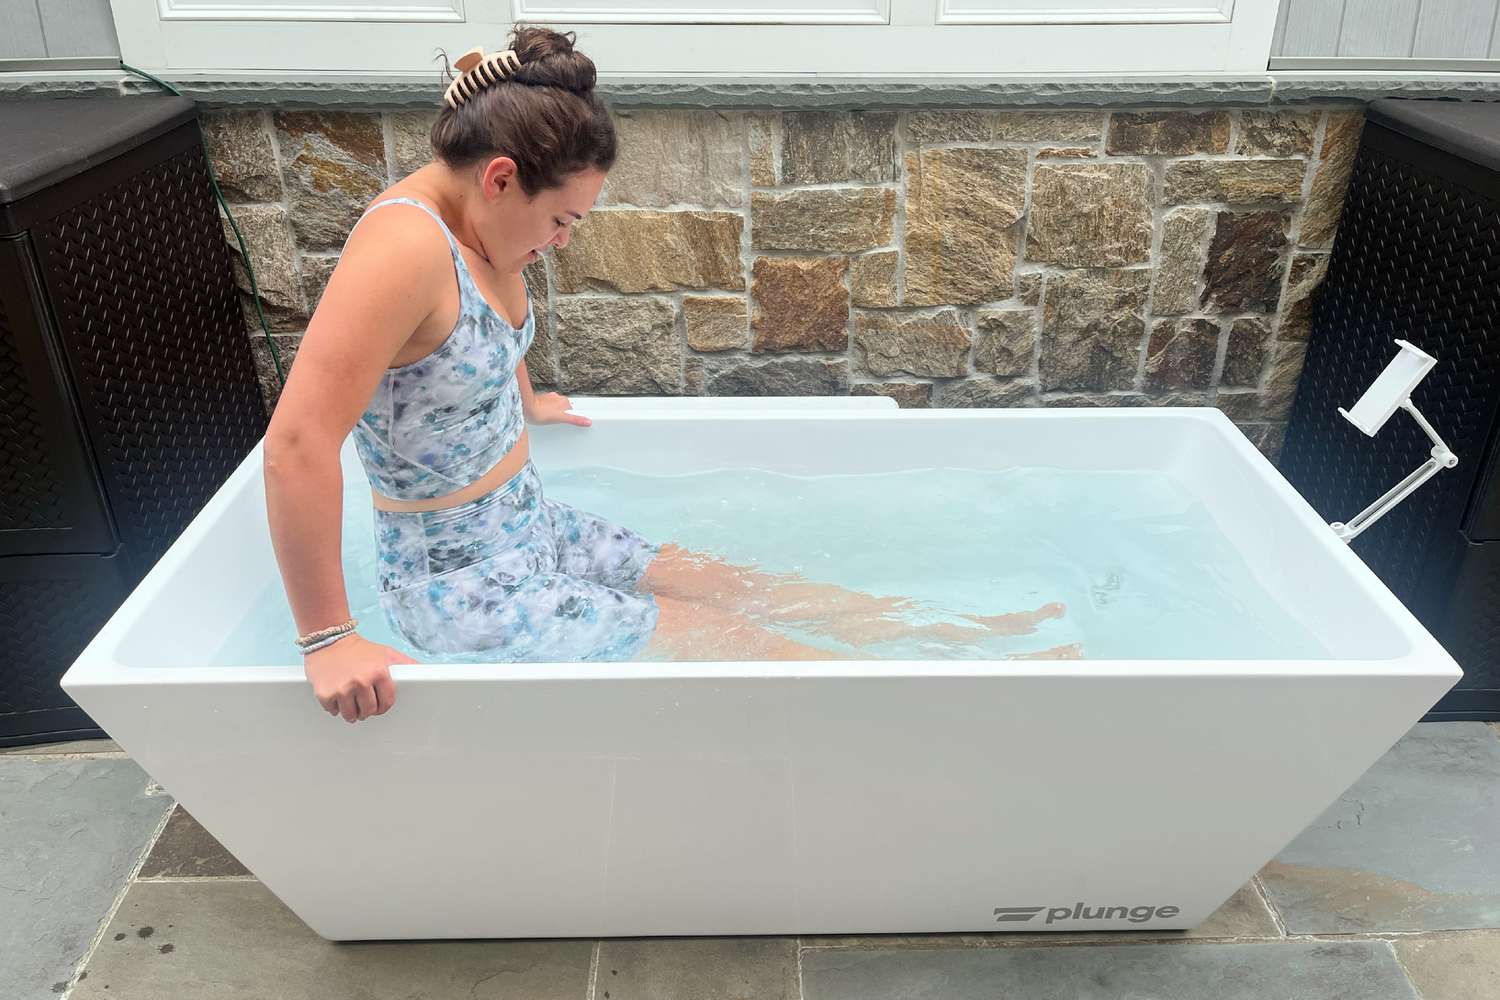 A person lowers themselves into the PLUNGE Cold Plunge Tub